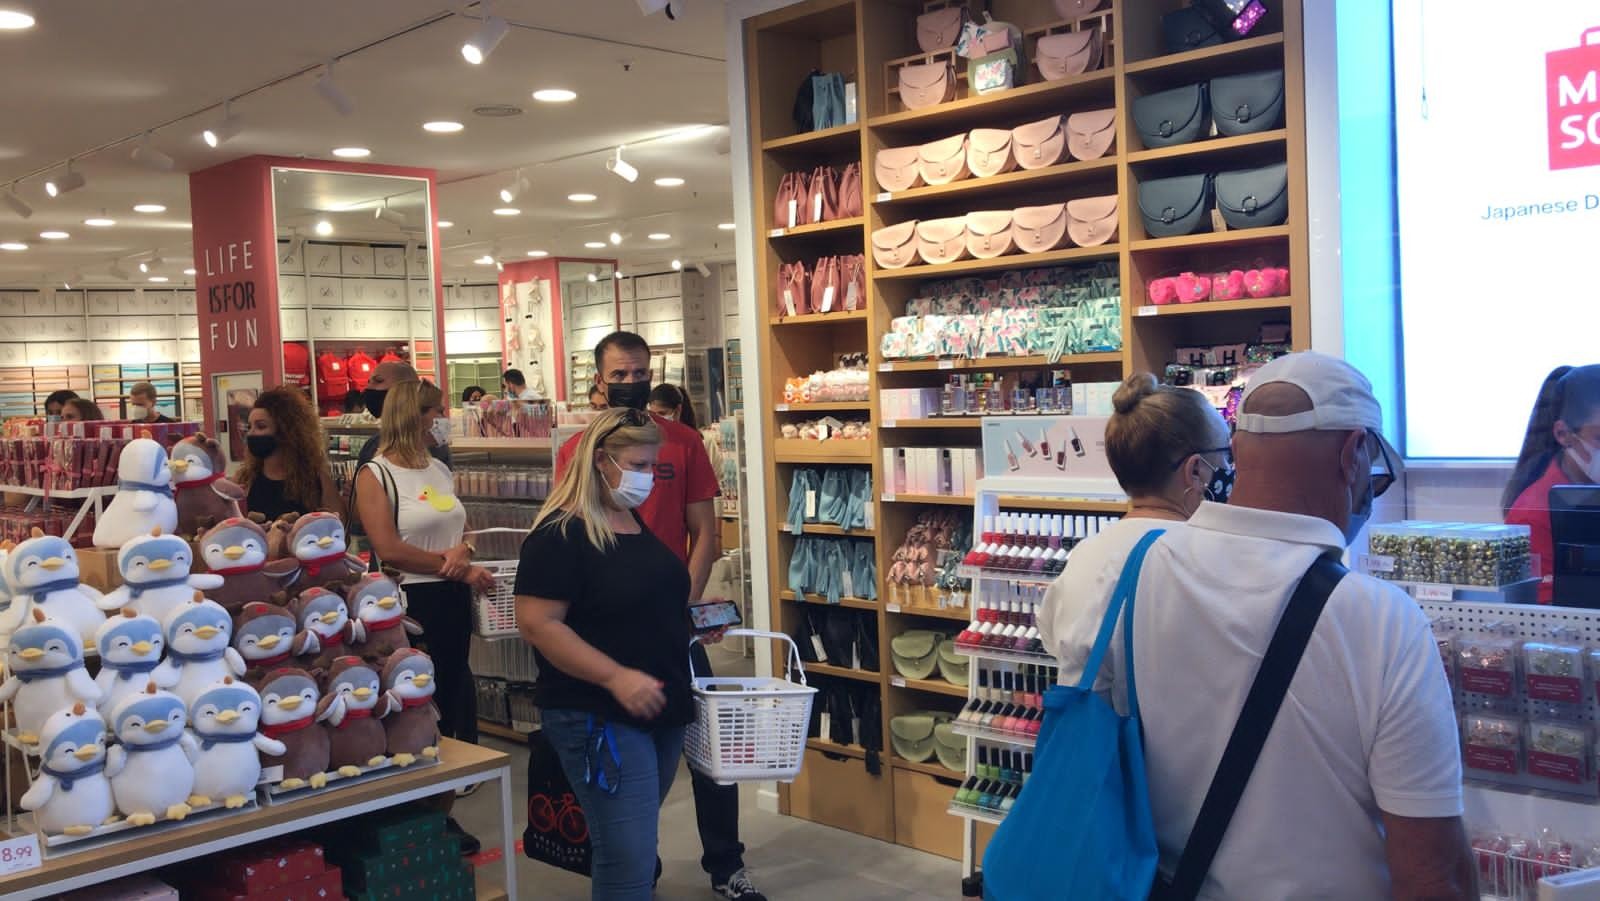 MINISO Opens in Deptford Mall. Global Affordable Lifestyle Variety